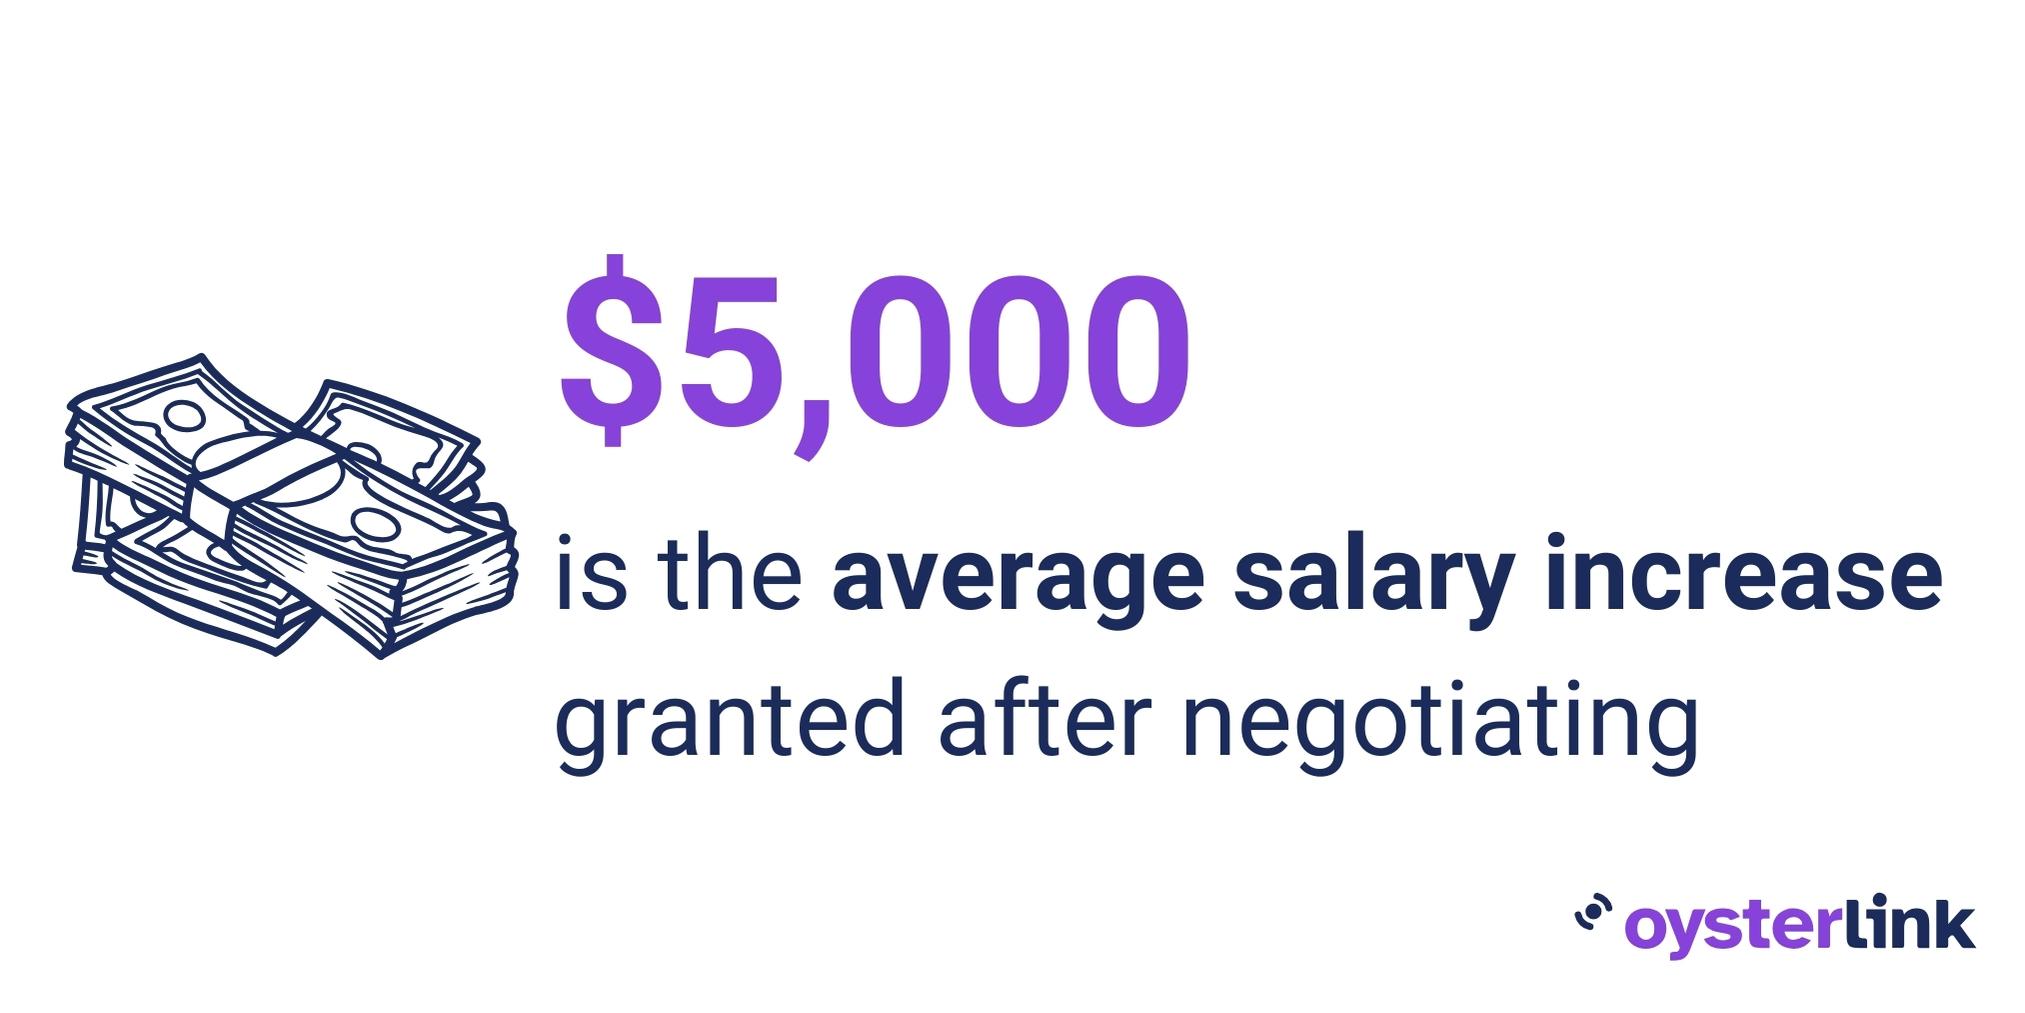 A graphic showing how $5,000 is the average salary increase granted after negotiating